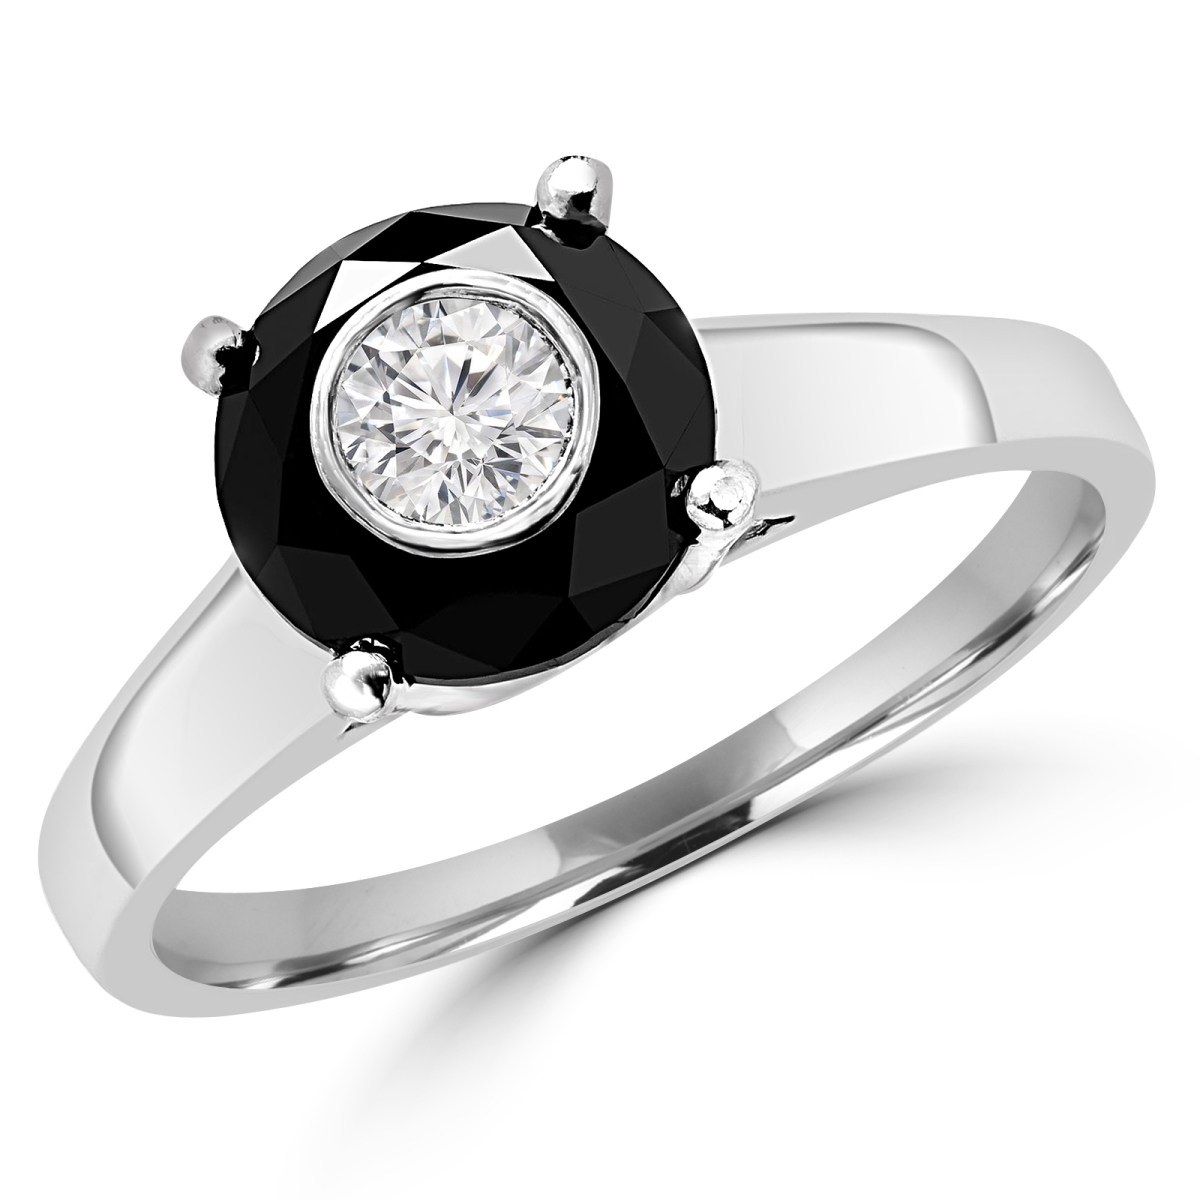 MD180615-3.75 0.9 CTW Round Black Diamond Simion Set Solitaire with Accents Engagement Ring in 14K White Gold - Size 3.75 -  Majesty Diamonds